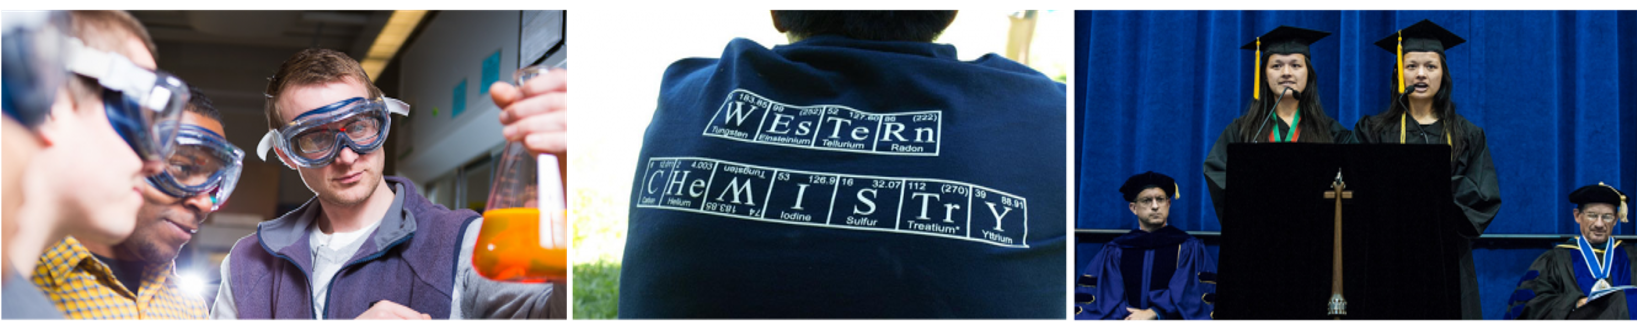 Photo compilation 1: Dr. Gilbertson with students in lab holding glassware 2: students back wearing western chemistry shirt 3: students speaking at graduation